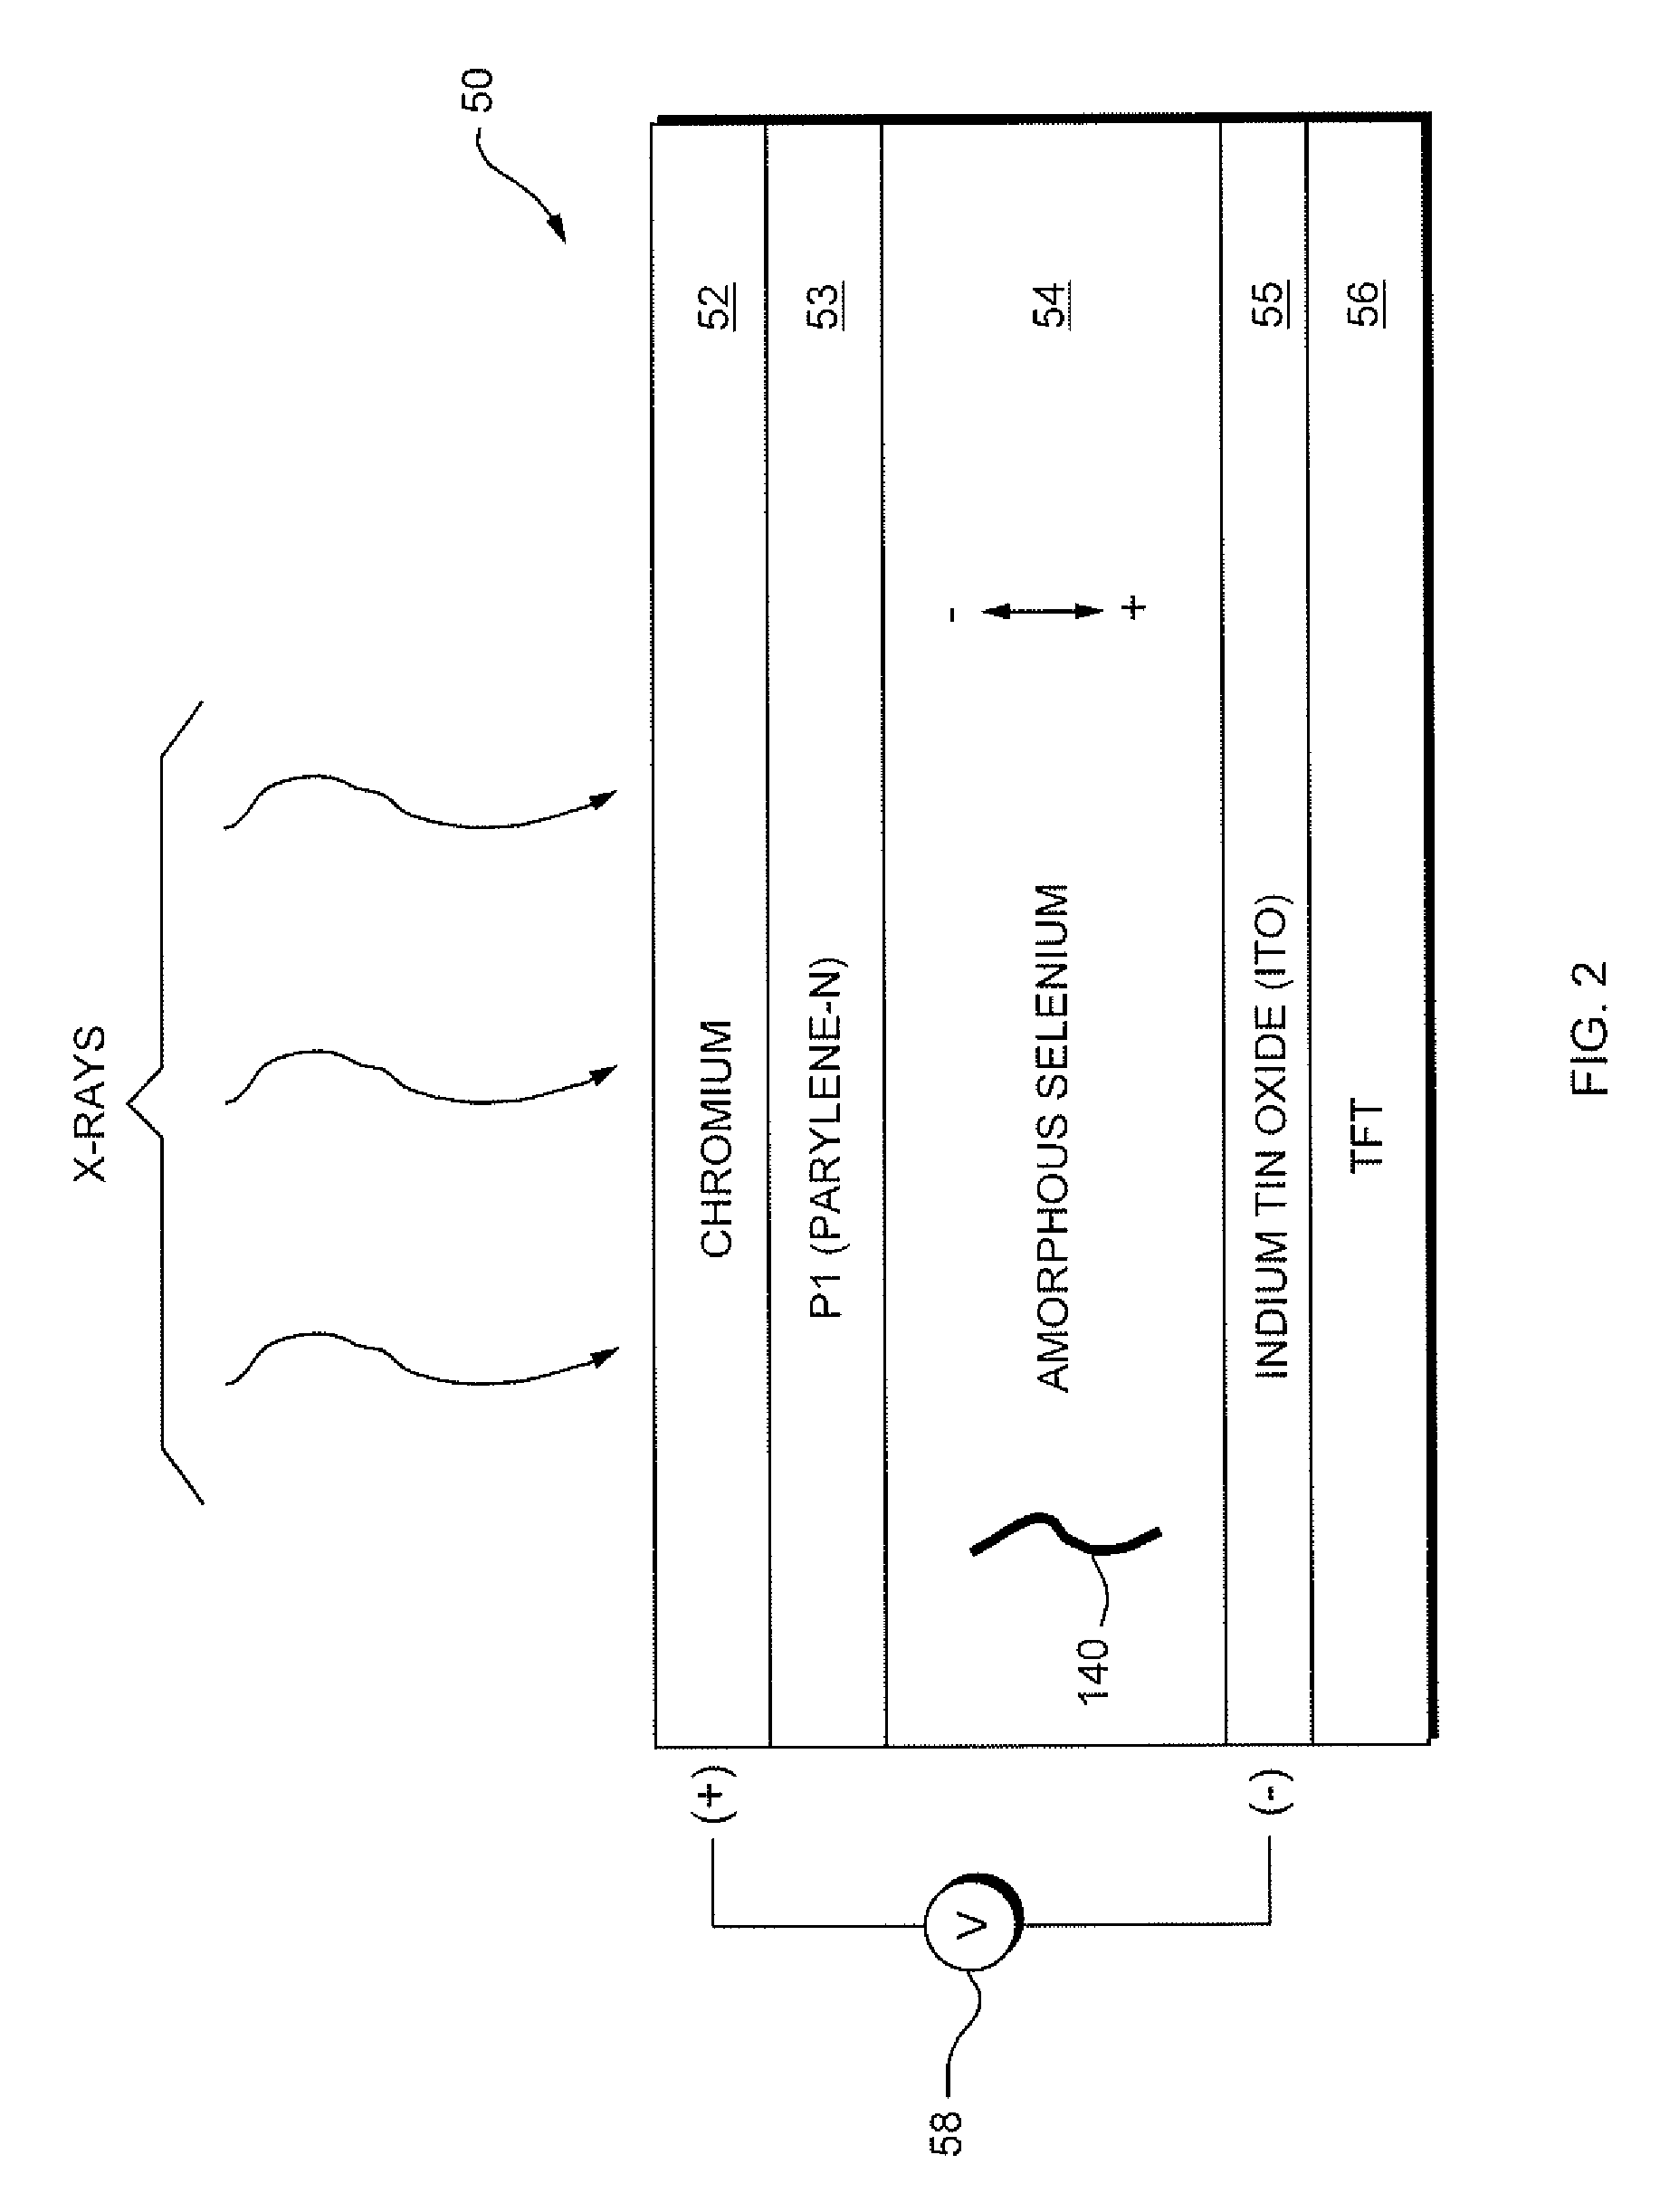 System and Device for Non-Destructive Raman Analysis